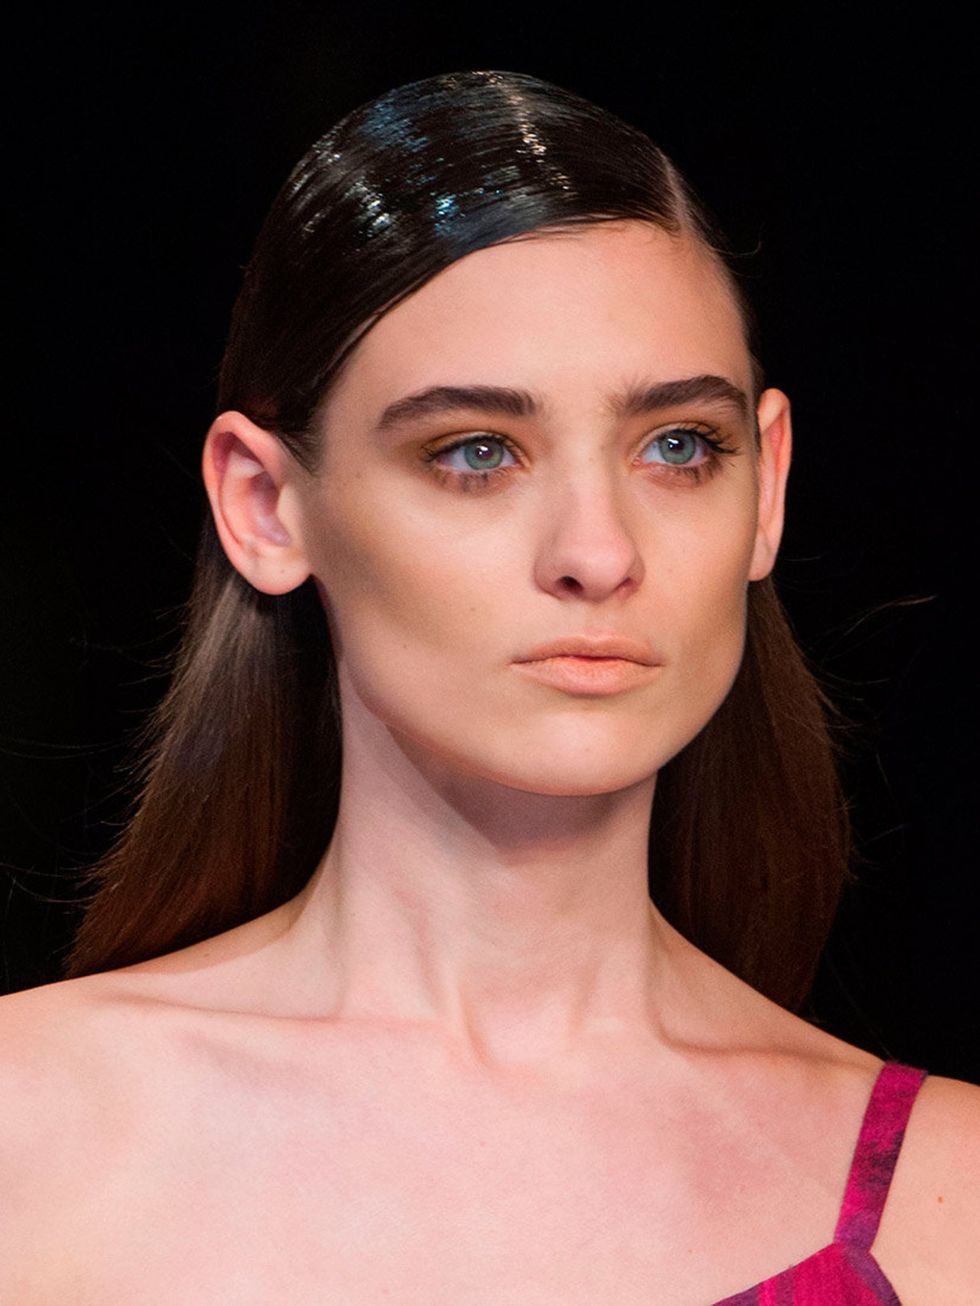 <p>Hair Stylist: James Pecis for Moroccanoil</p><p>Look: Side Slicked</p><p>Inspiration: Futuristic pieces in the collection influences a minimalistic, clean and very polished hairstyle. </p><p>Key Product: <a href="http://www.lookfantastic.com/moroccanoi